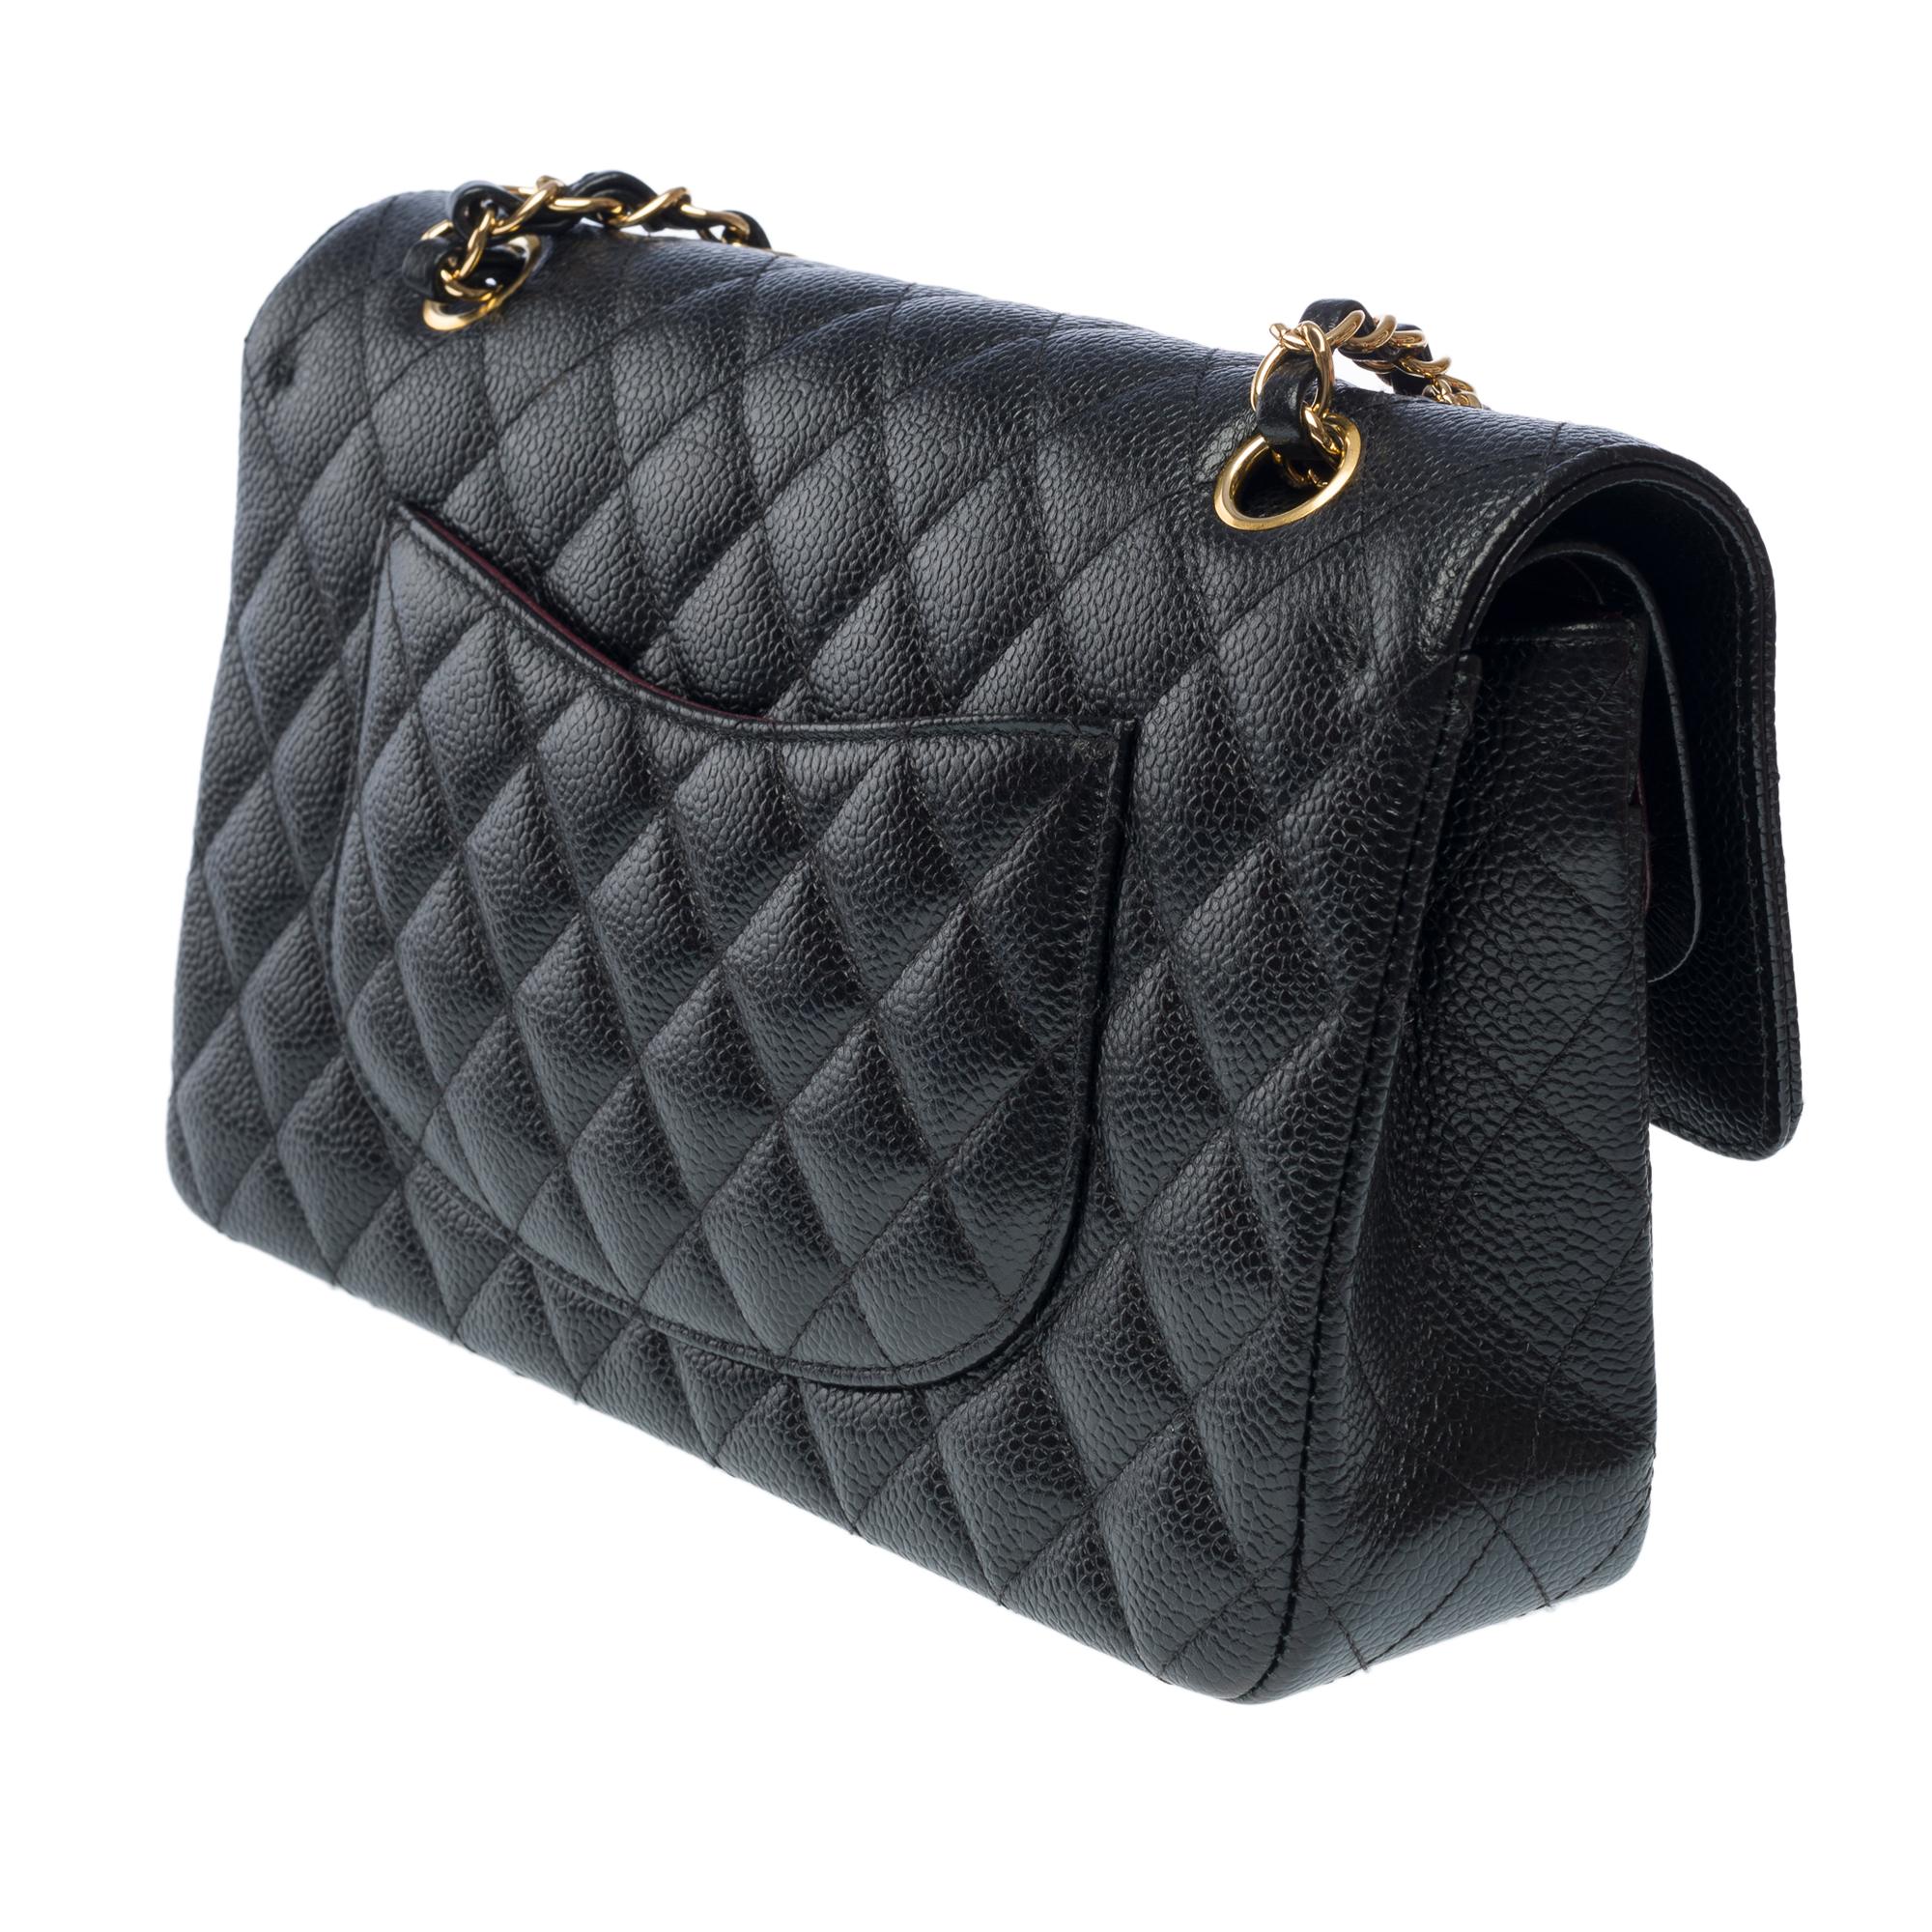 Chanel Timeless double flap shoulder bag in Black Quilted Caviar leather, GHW 2